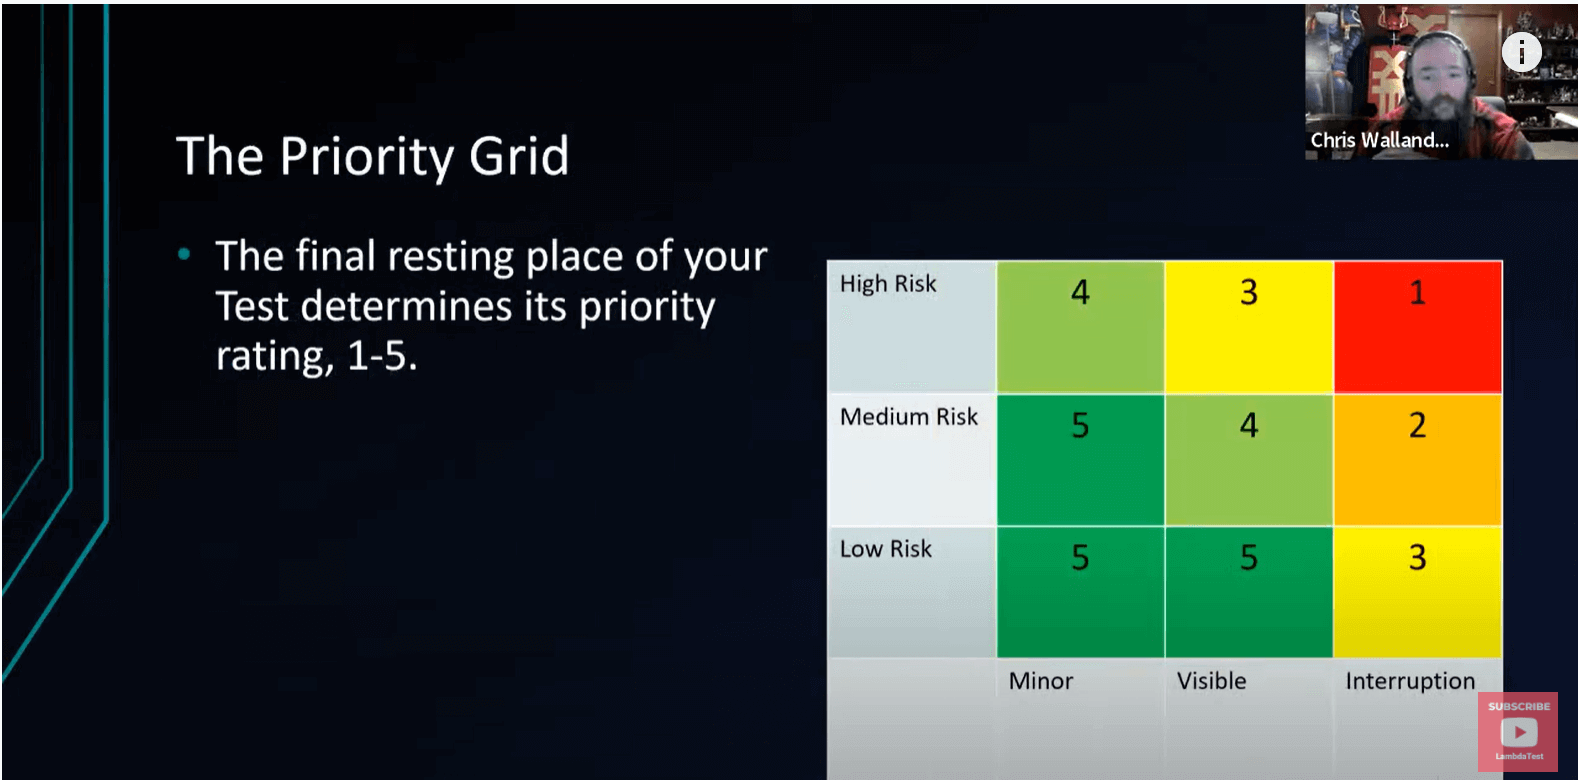 The Priority Grid